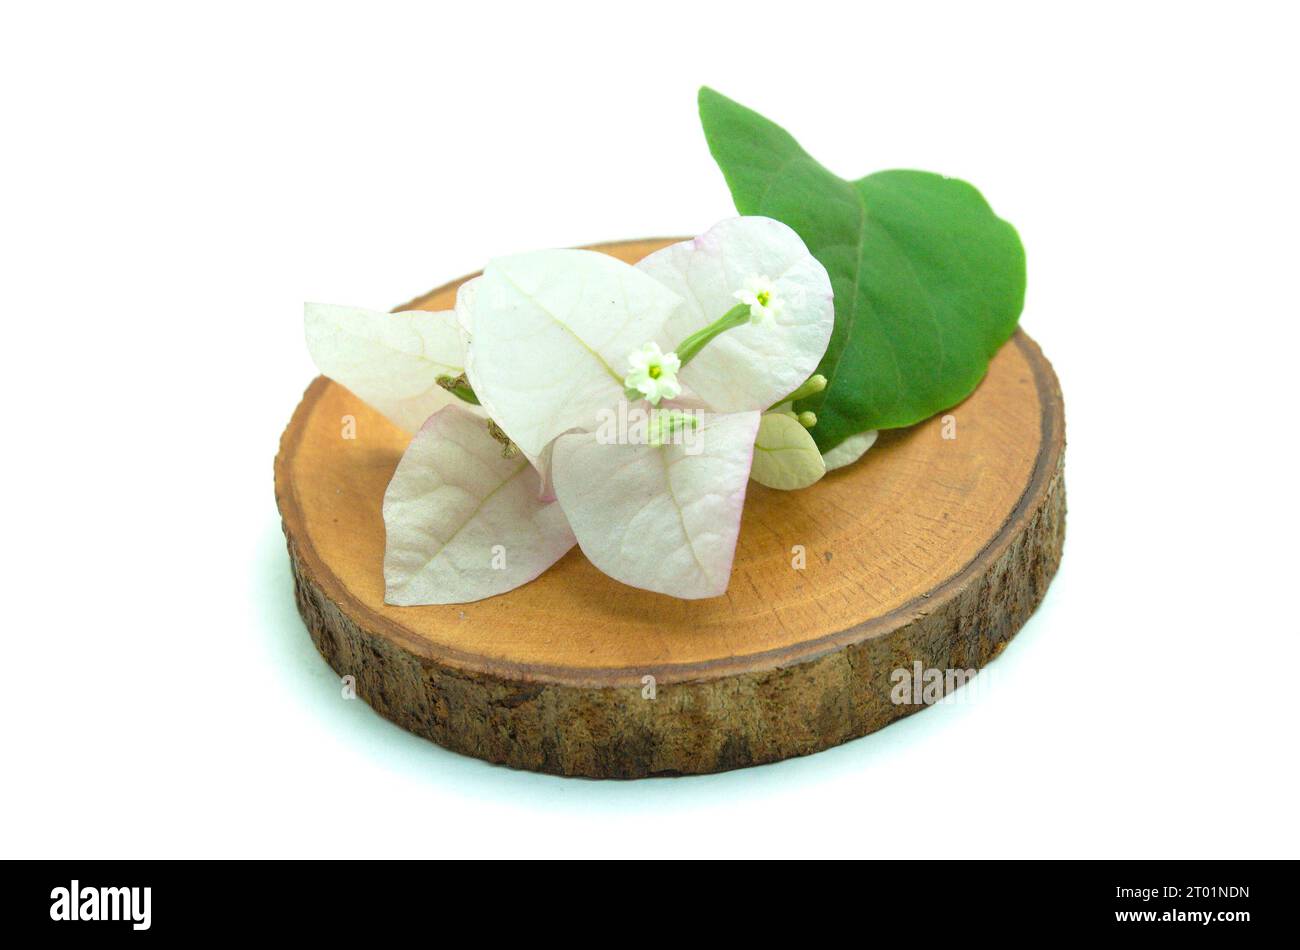 A rustic and minimalist image of a small White Bougainvillea Flower resting on a wooden slice. This asset is perfect for creating nature-themed design Stock Photo